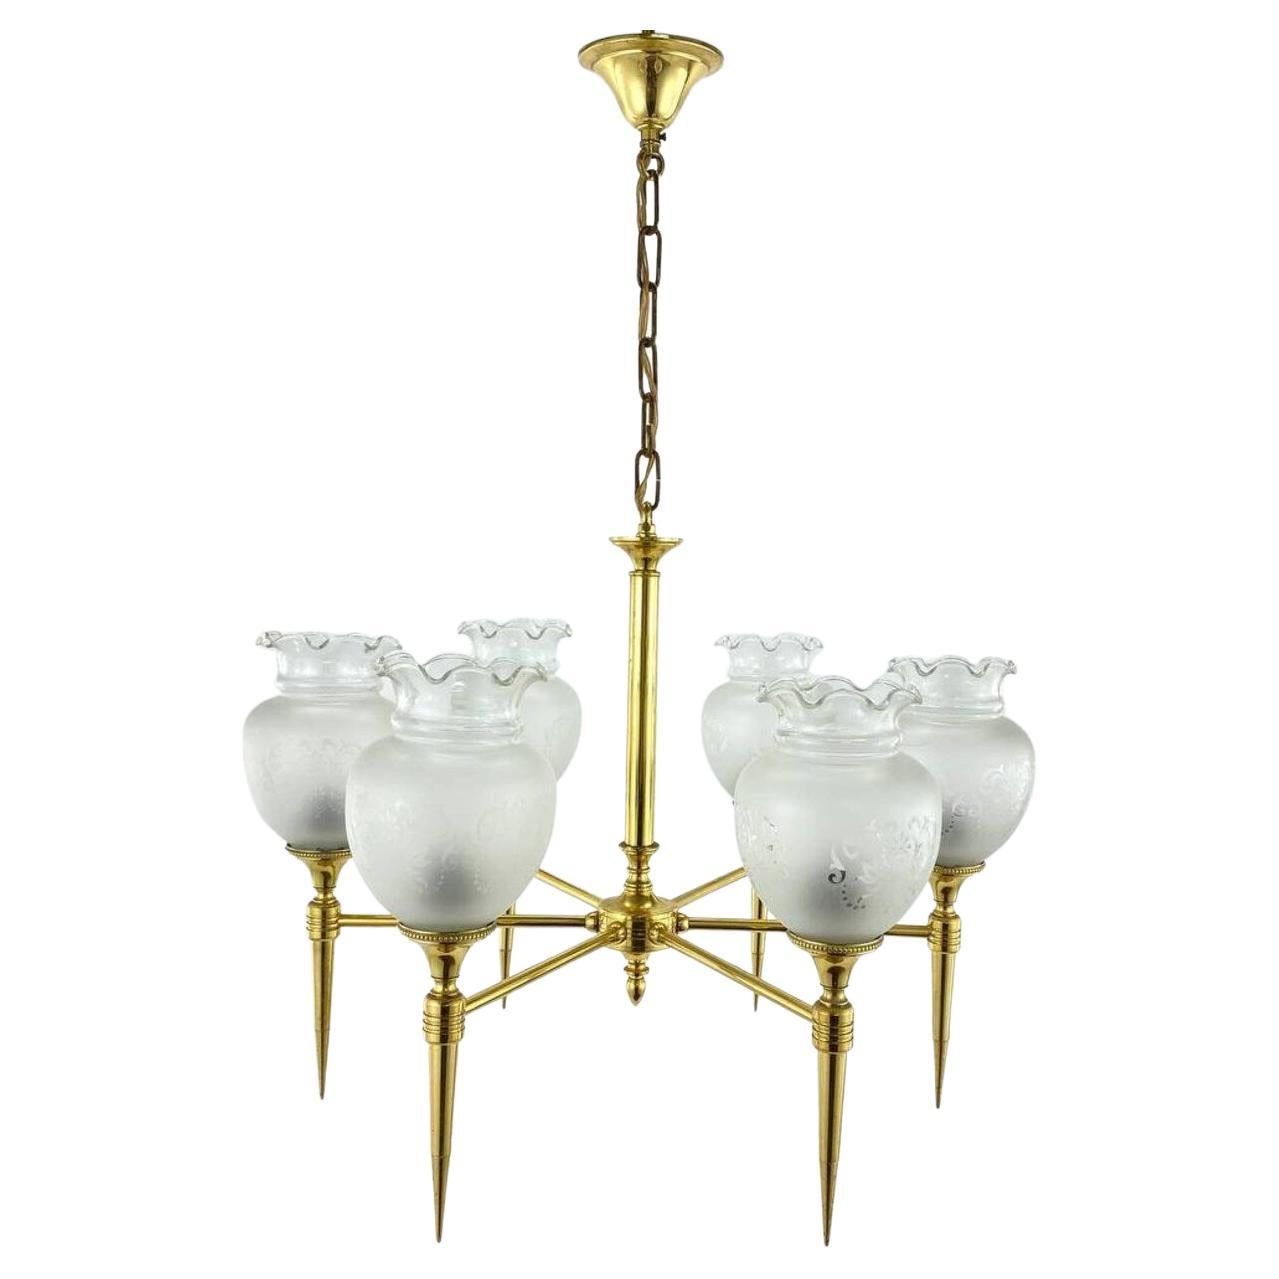 Vintage 6 Light Chandelier Brass and Frosted Glass Ceiling Lamp, France, 1970 For Sale